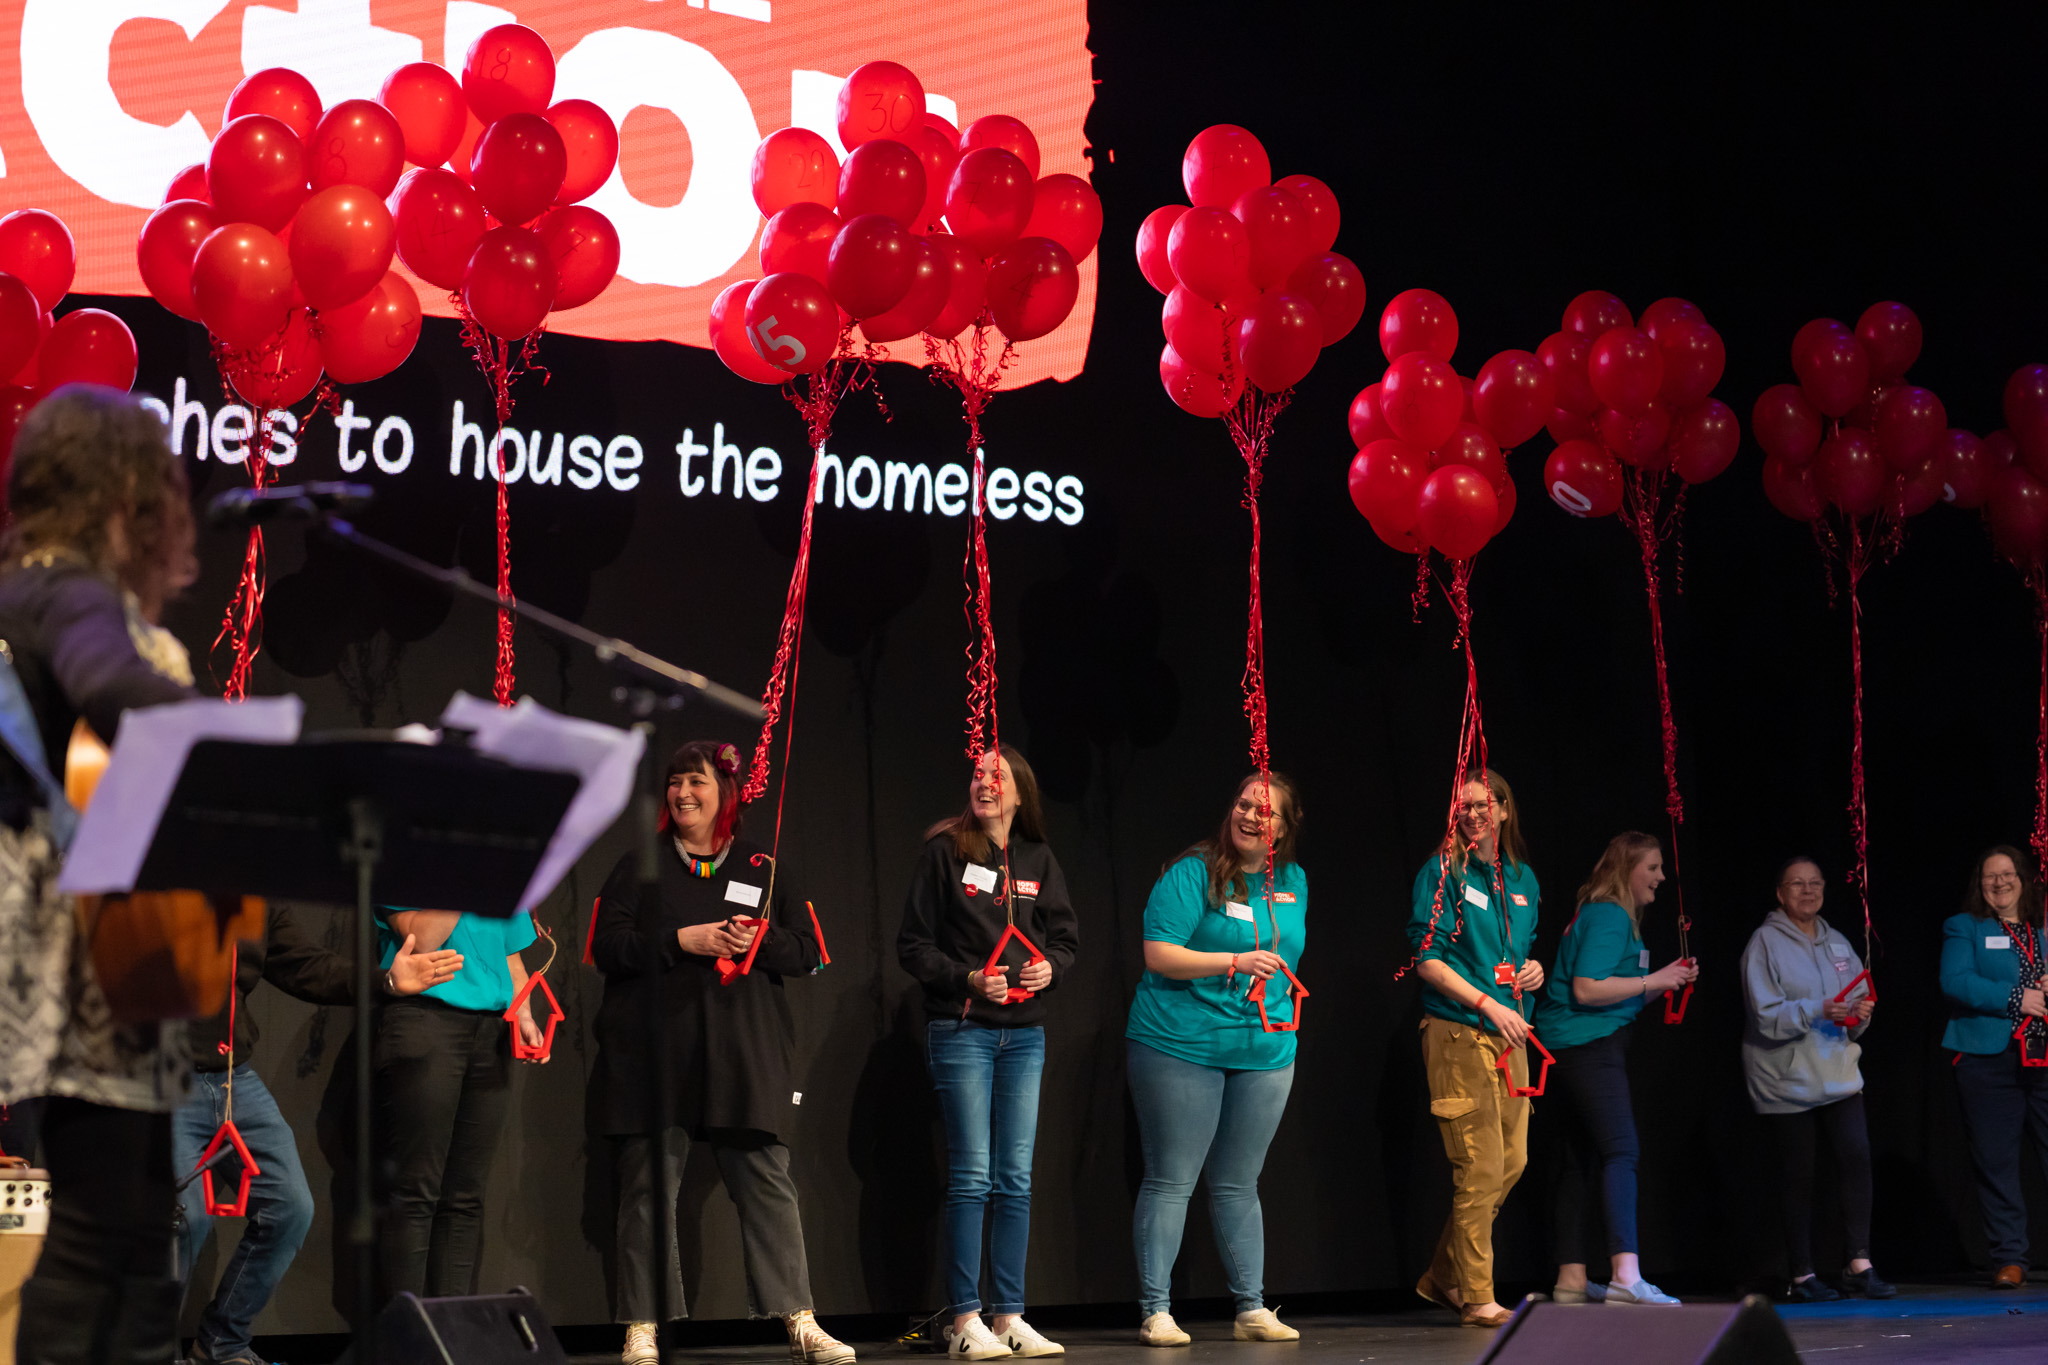 Churches housing the homeless: conference reflections